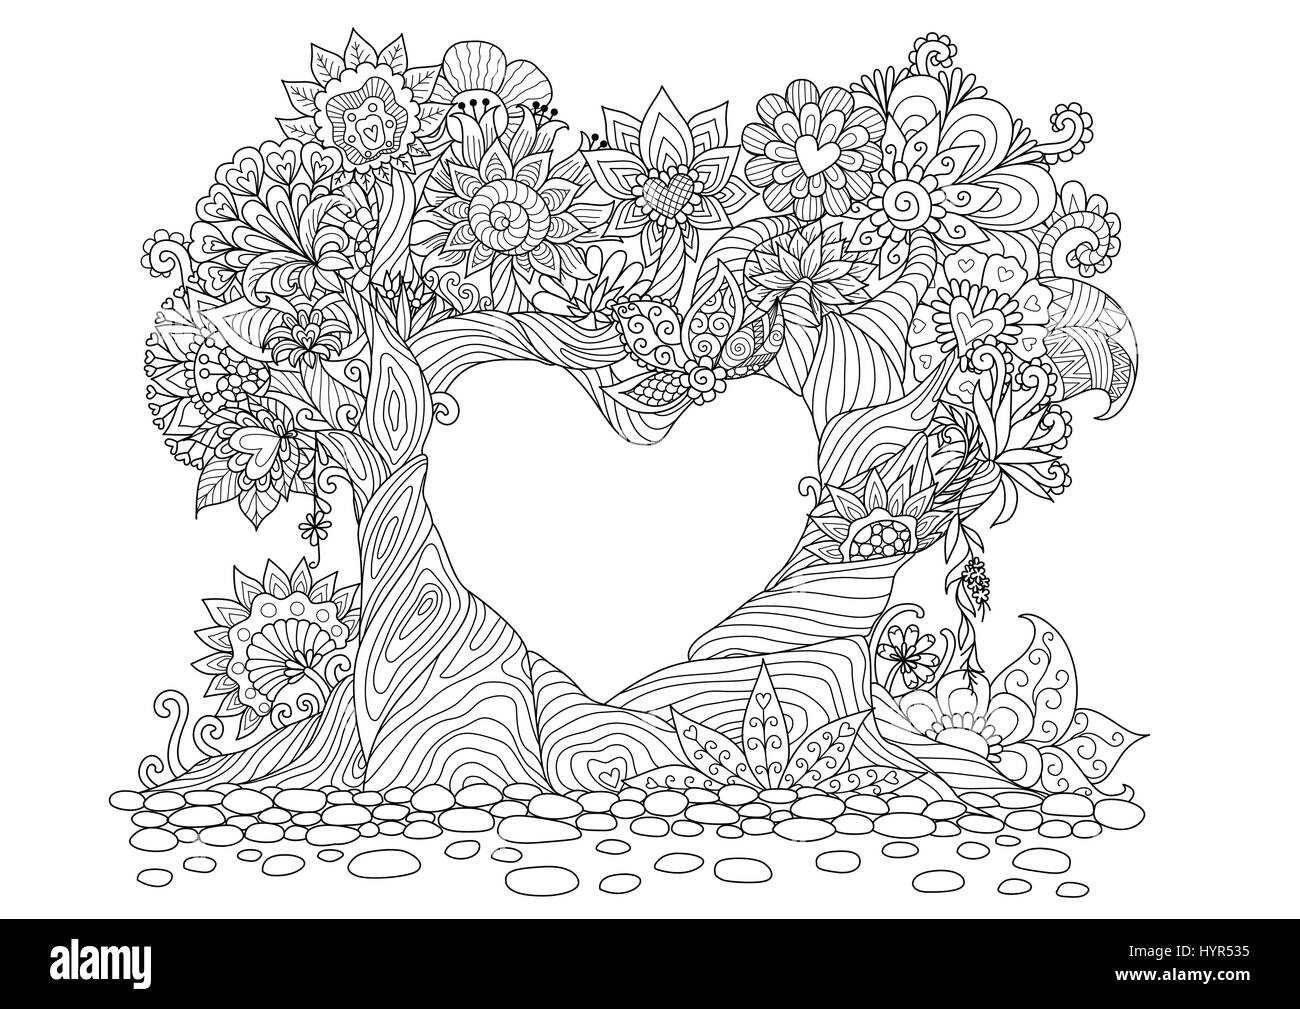 Adult Coloring Book: 75+ Relaxing Black Background Pages of Flowers,  Animals, Nature, Patterns, Landscapes | Coloring Book for Adults, Women,  Men 